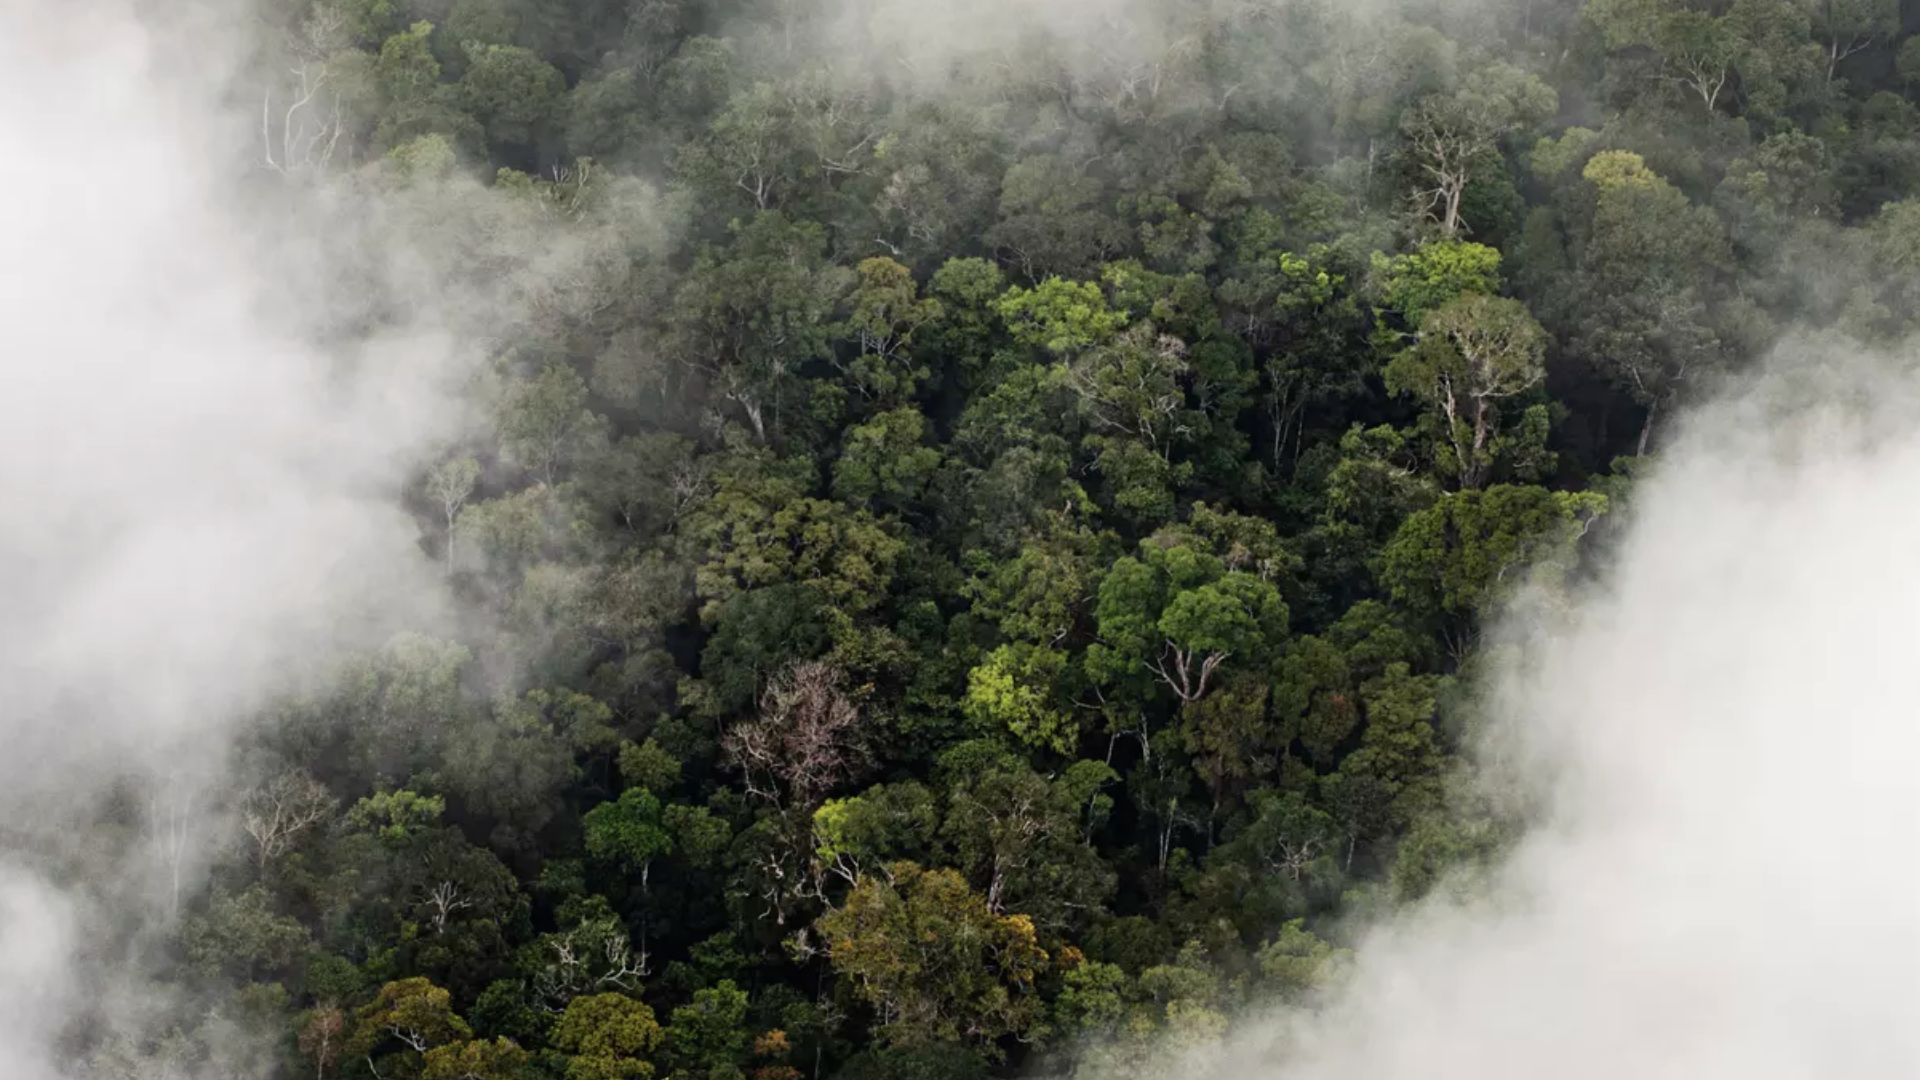 That Helps Journalism Own the Amazonian Make Rainforest Fund Giant the Rainforest Rain Supertrees: | Its Meet